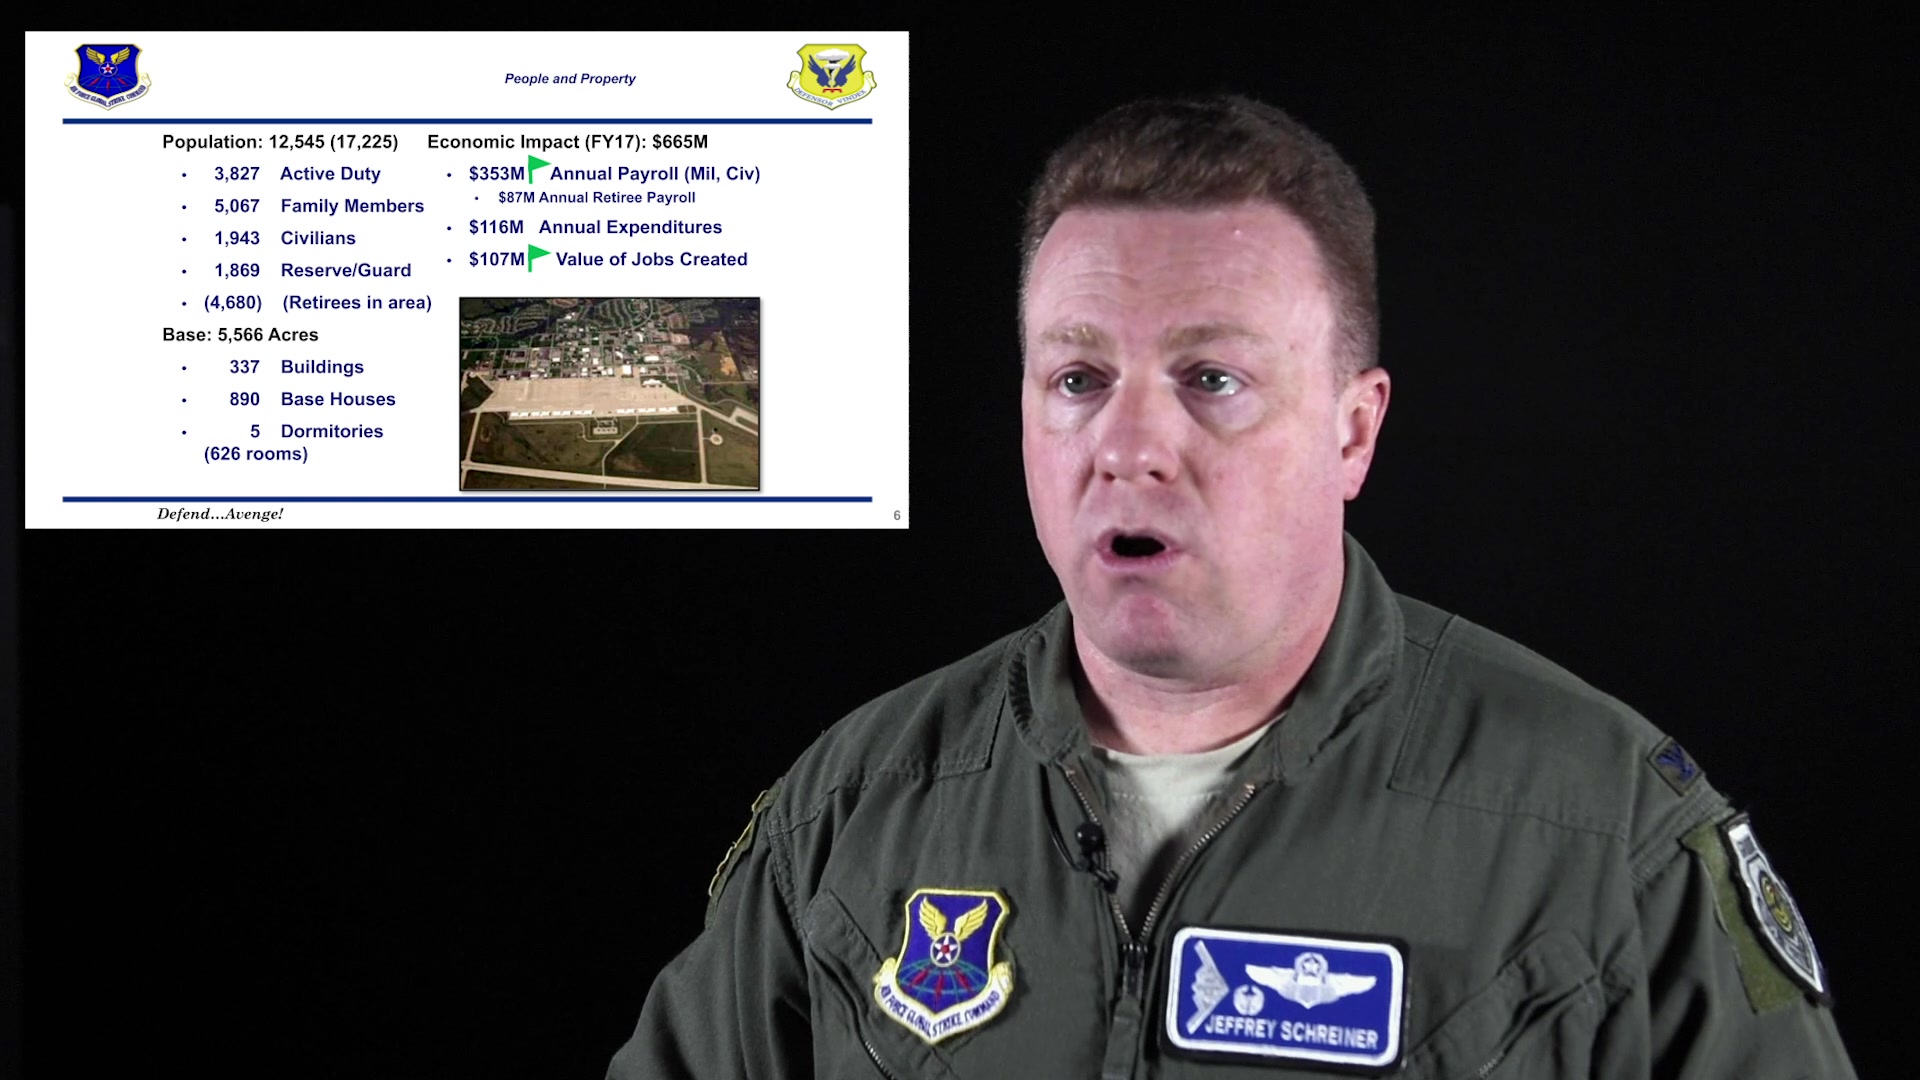 U.S. Air Force Col. Jeffrey Schreiner, 509th Bomb Wing commander, virtually briefs newcomers at Whiteman Air Force Base, Missouri, Sept. 1, 2020. This brief allows Airmen new to Whiteman AFB to learn about the base and resources available to them. (U.S. Air Force photo by Airman 1st Class Christina Carter)